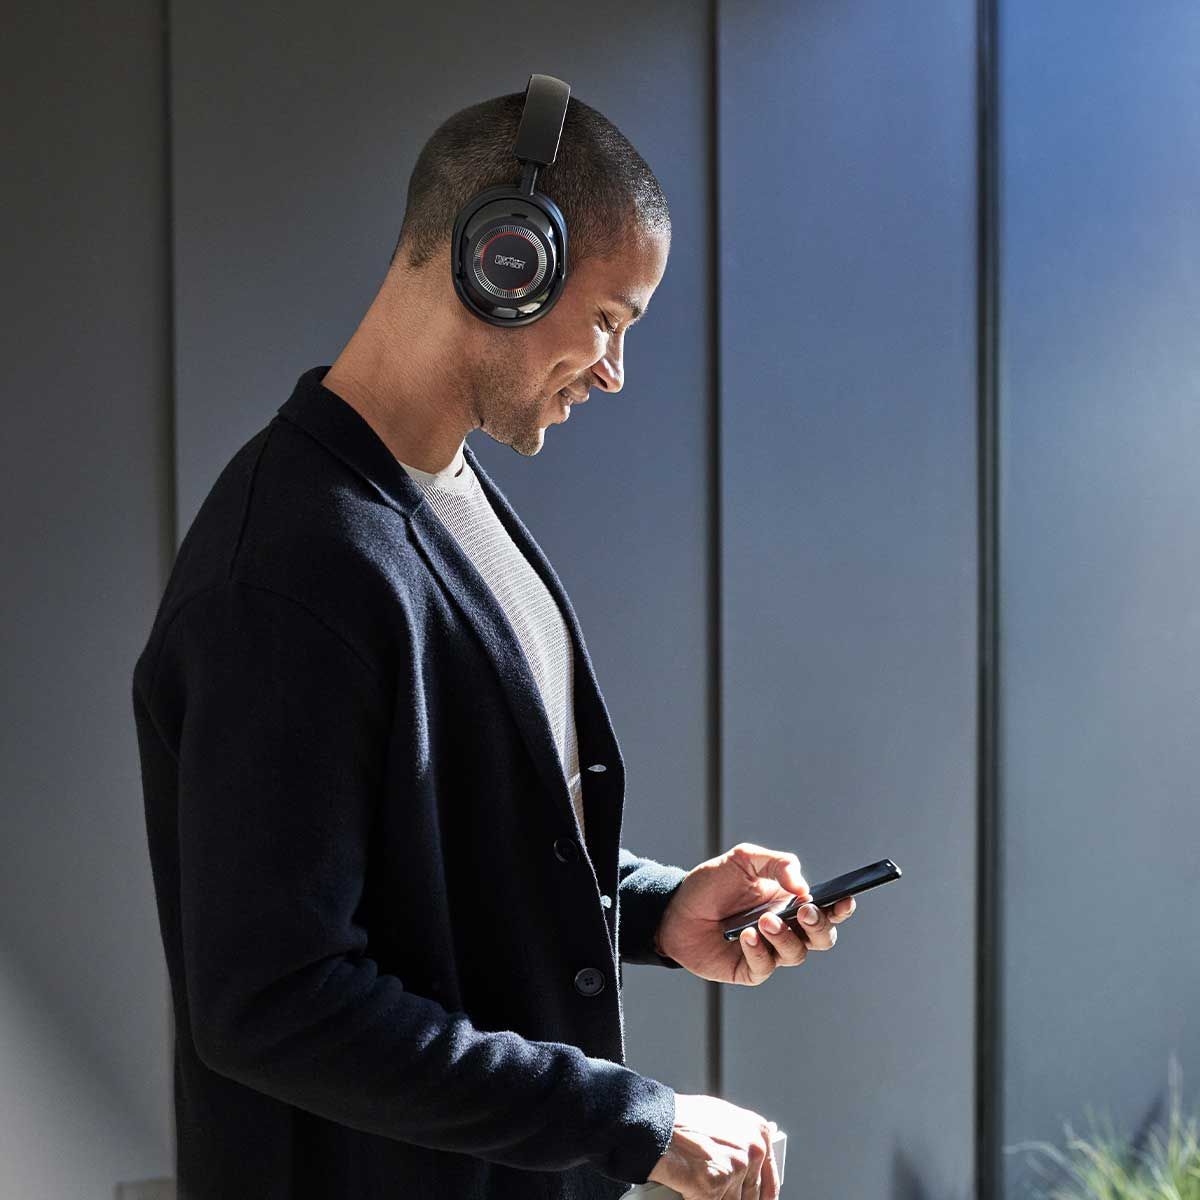 Male model wearing a pair of Mark Levinson № 5909 Premium Hi-Res Wireless ANC Over-Ear headphones at the airport.